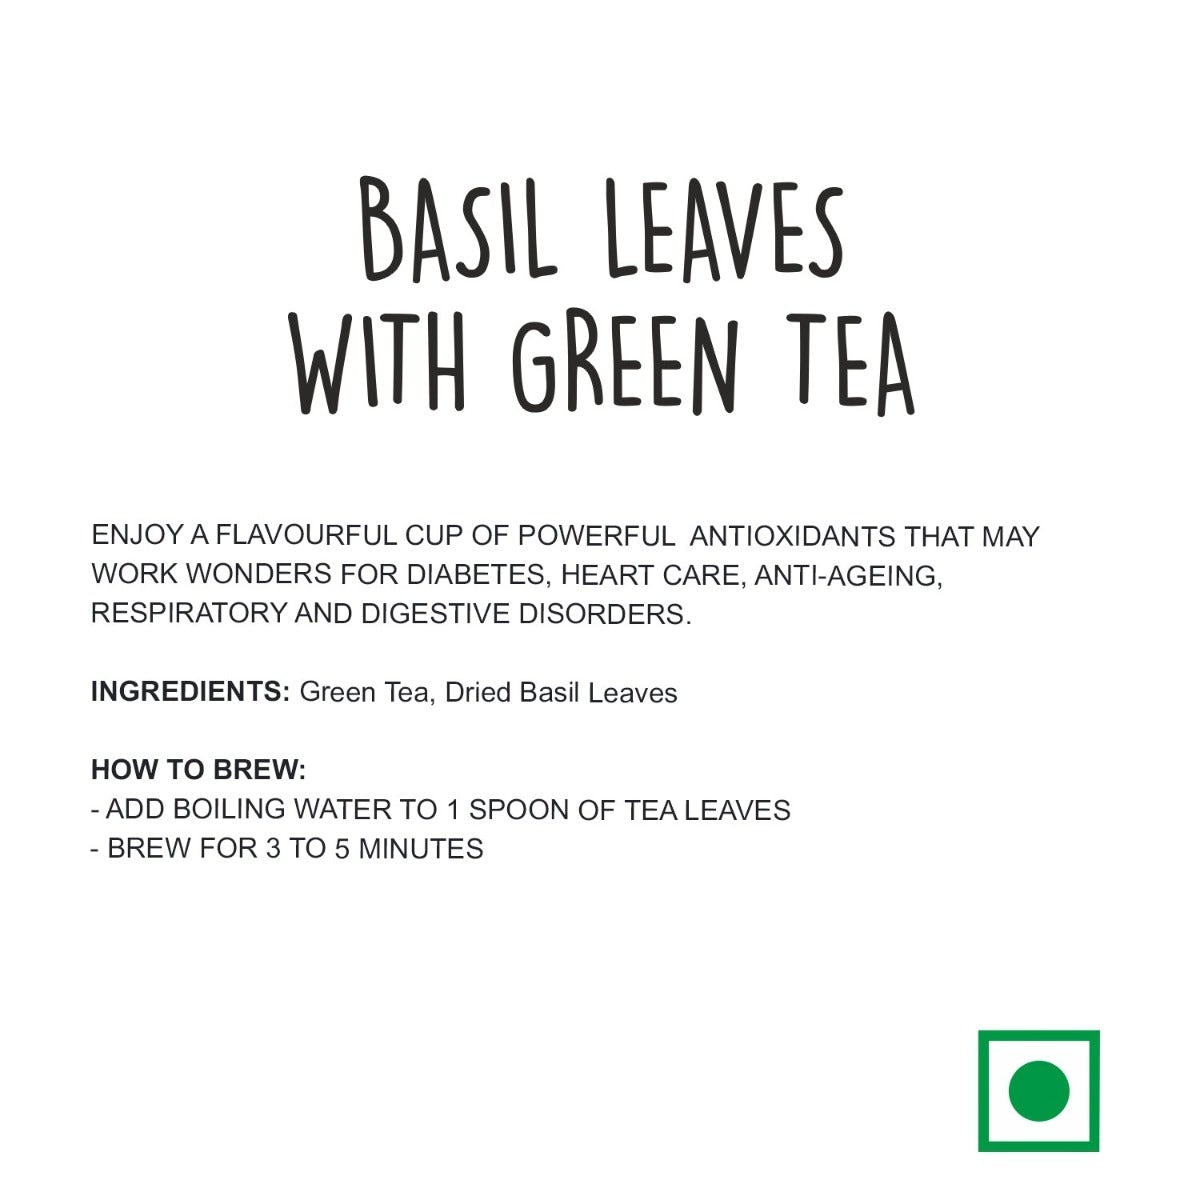 Basil Leaves with Green Tea